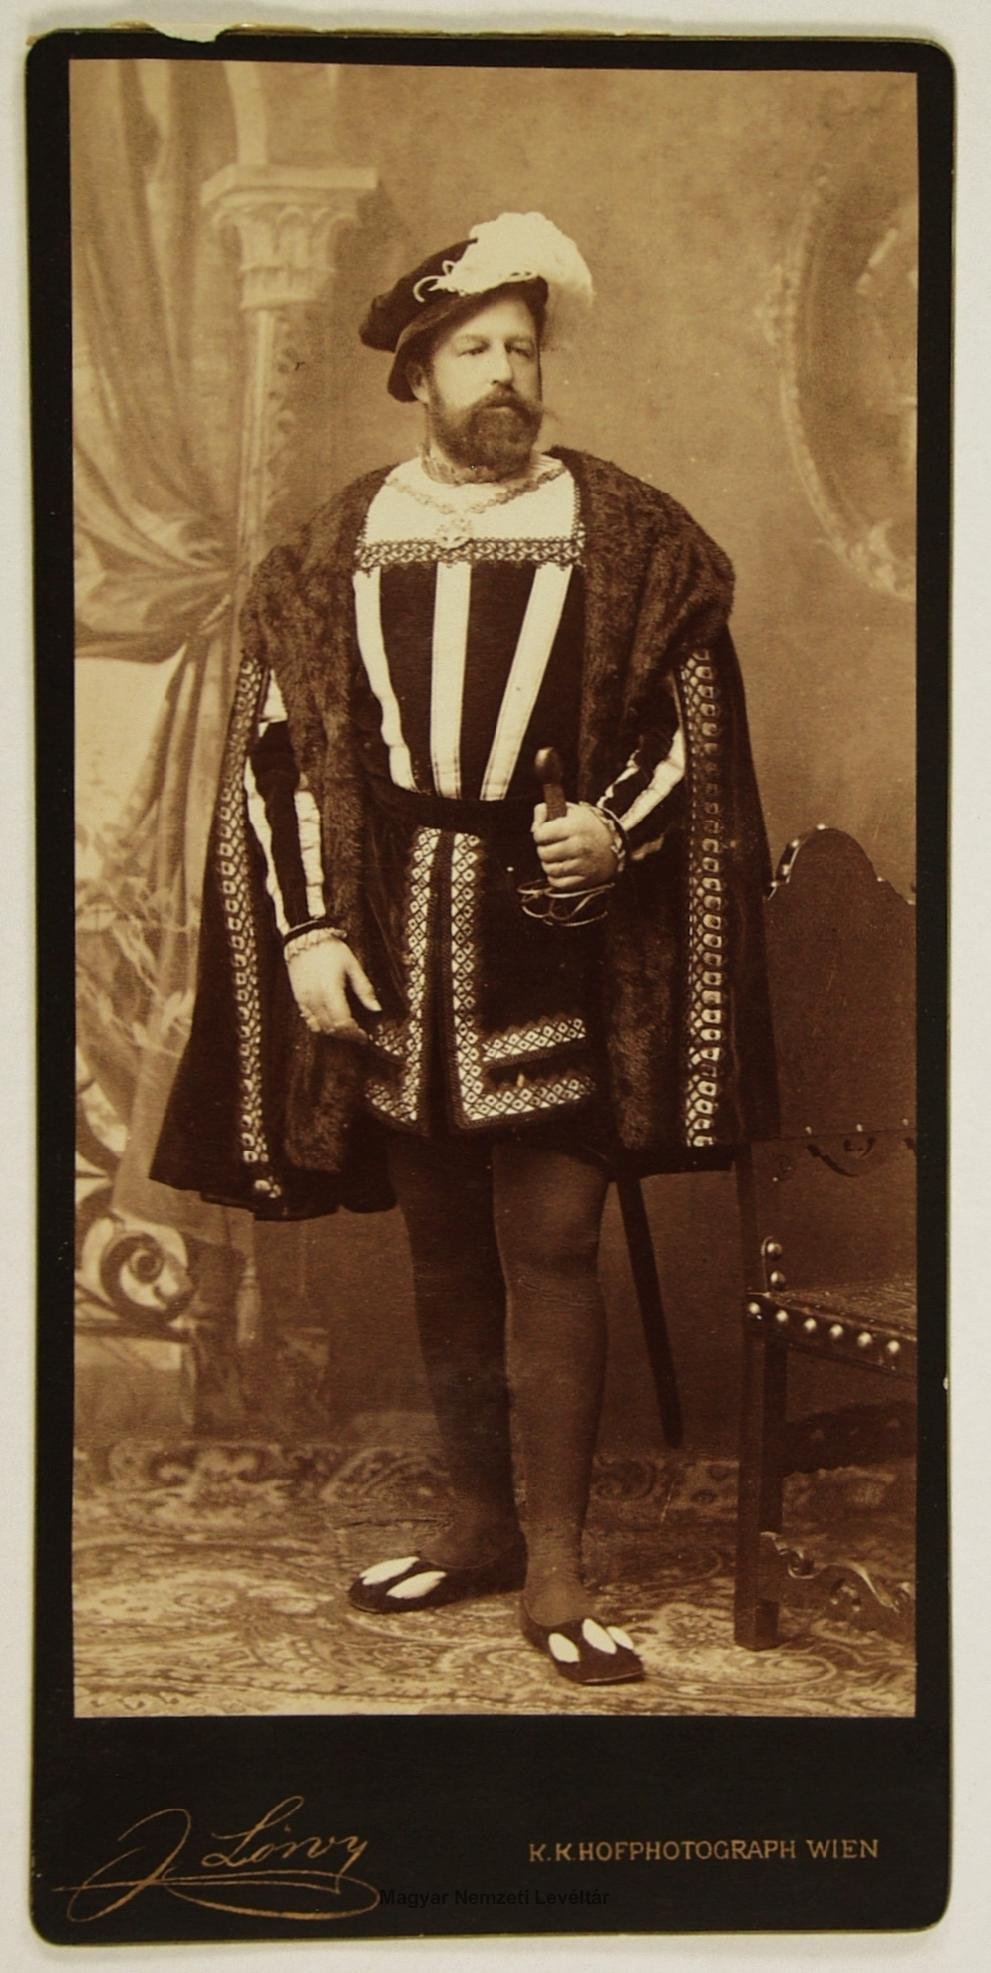  National Archives of Hungary, Festetics family archives, Prince Prince Philip of Saxe-Coburg-Gotha as a saxon elector, 1885